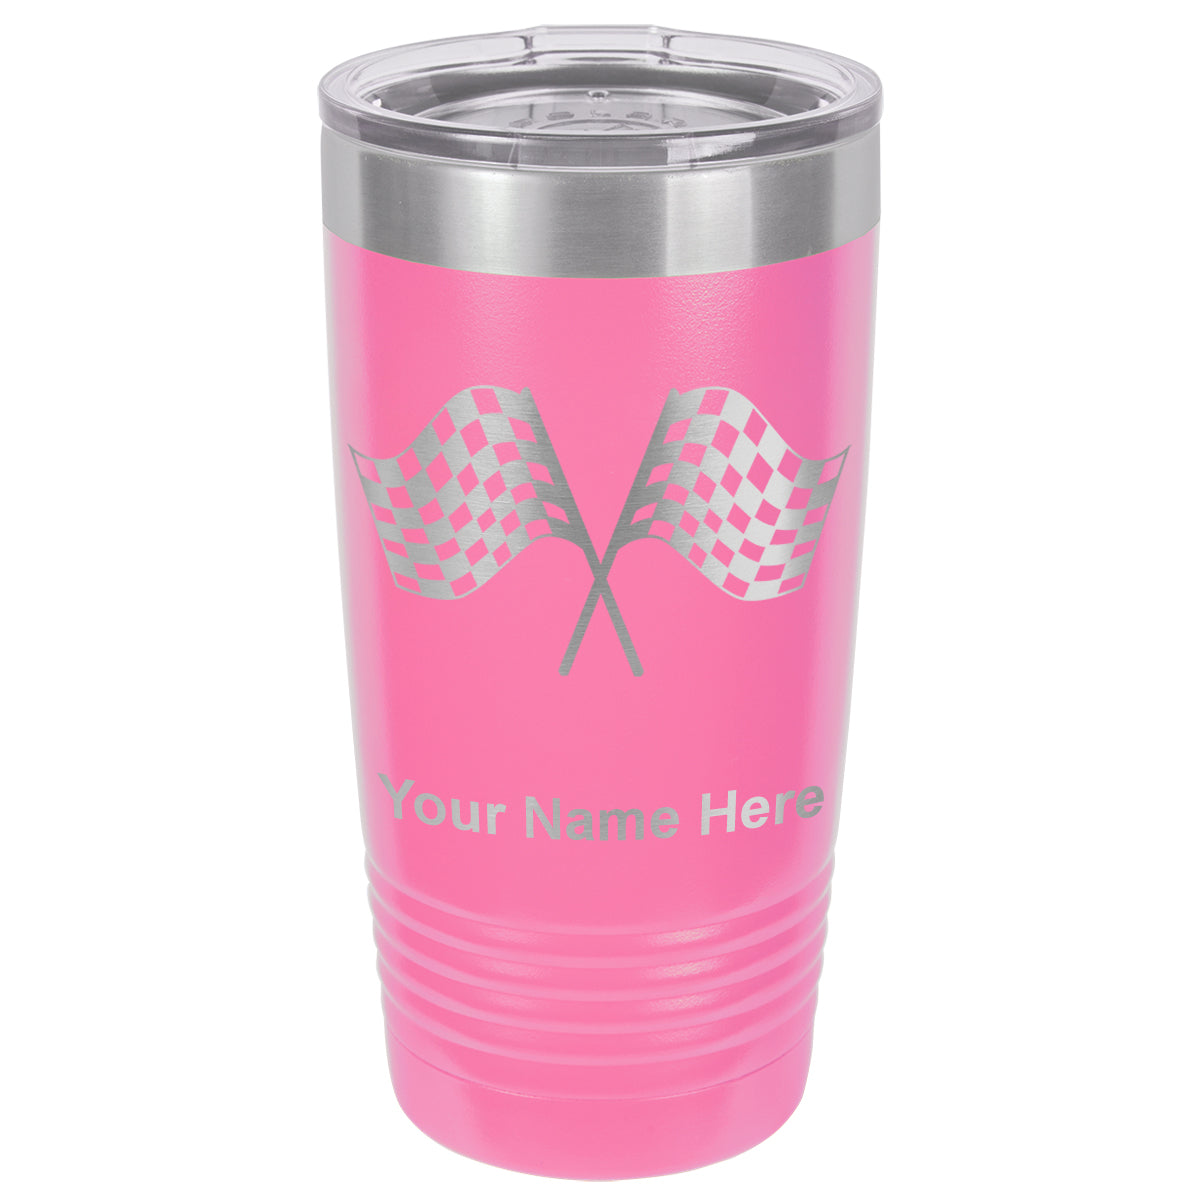 20oz Vacuum Insulated Tumbler Mug, Racing Flags, Personalized Engraving Included